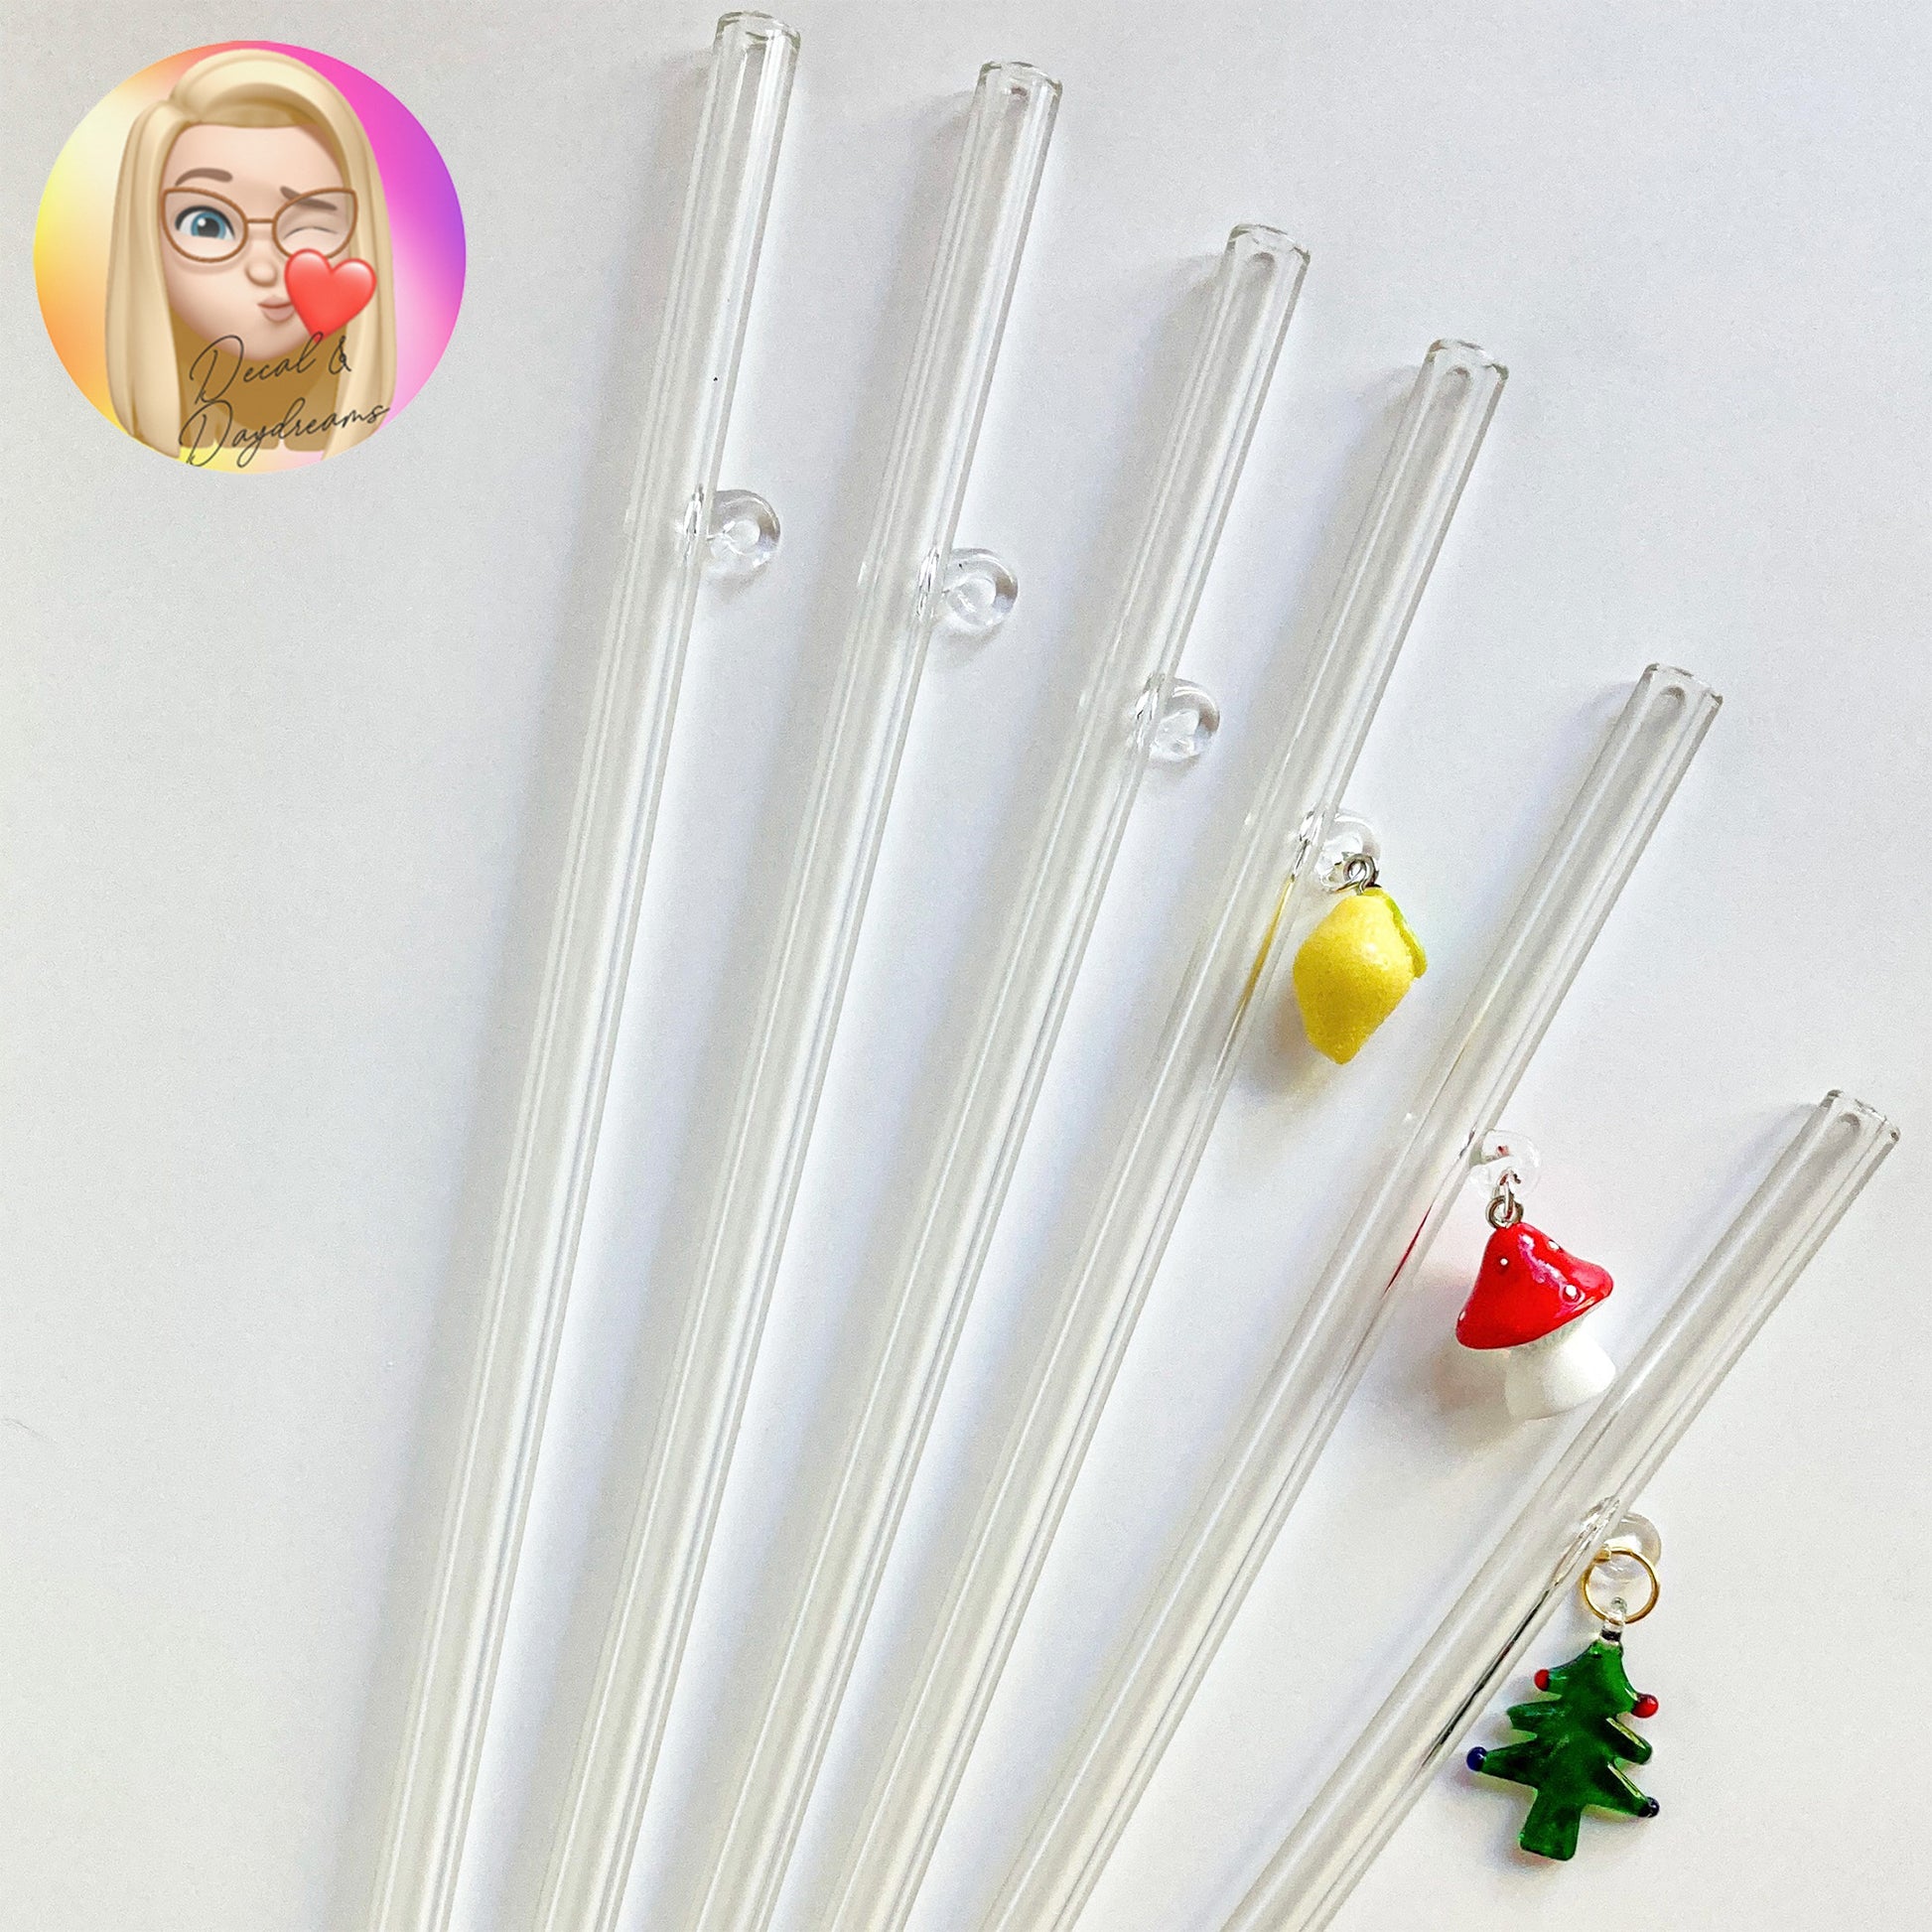 Glass Straw With A Hook